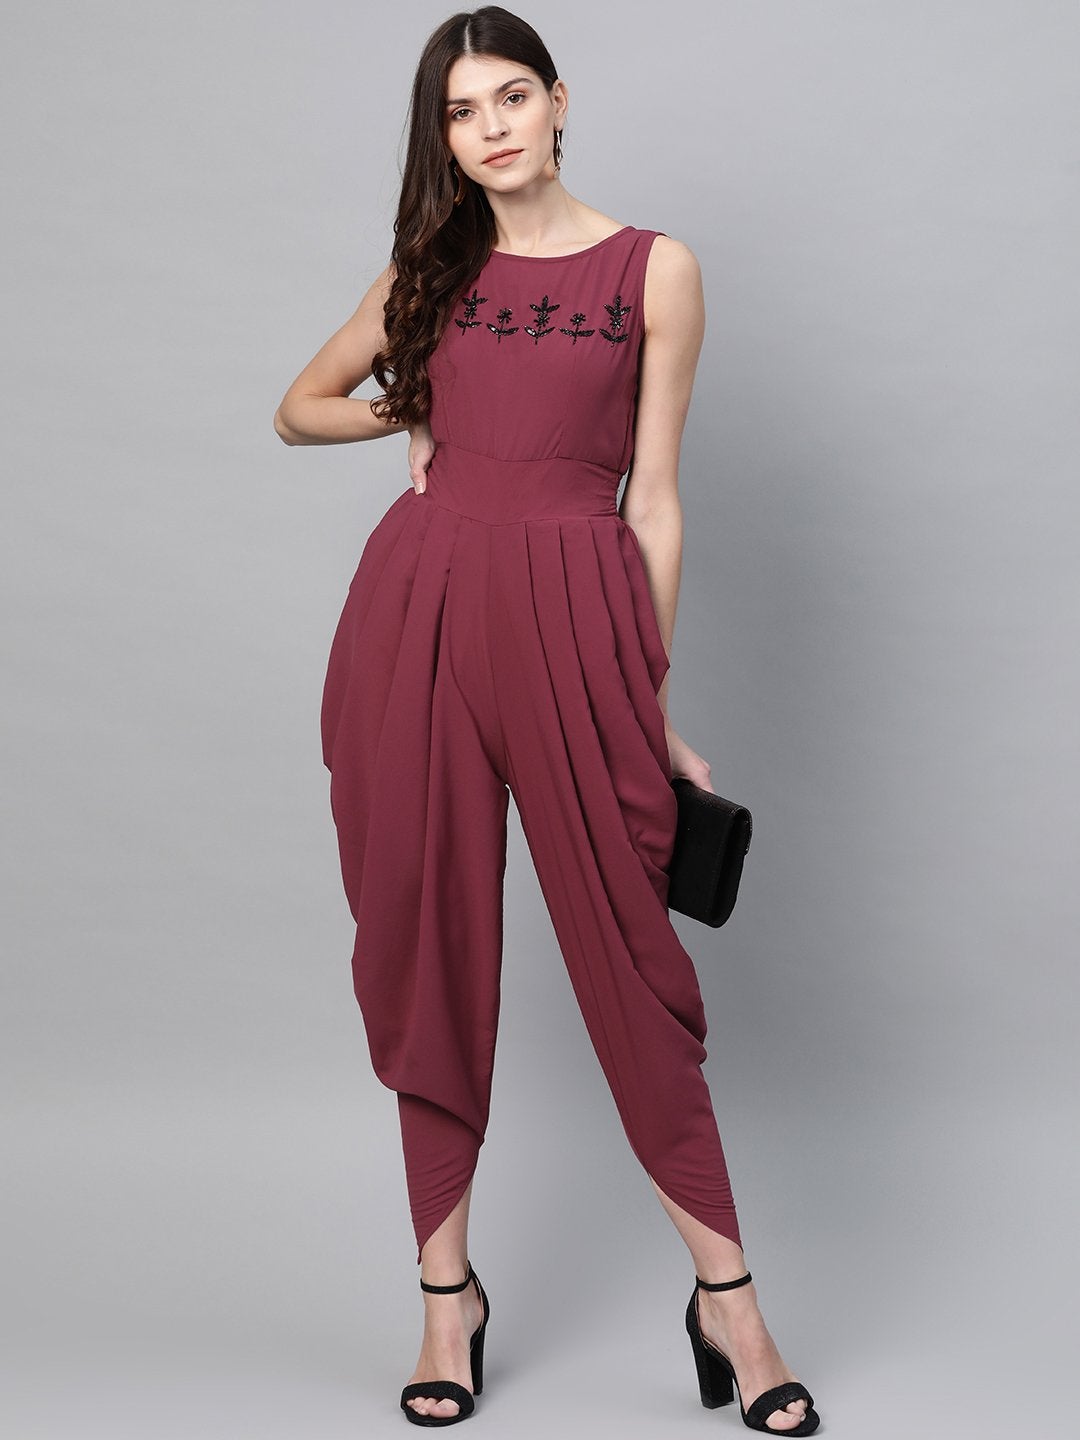 Women's Intricate Hand Embroidered Cowl Jumpsuit - Pannkh